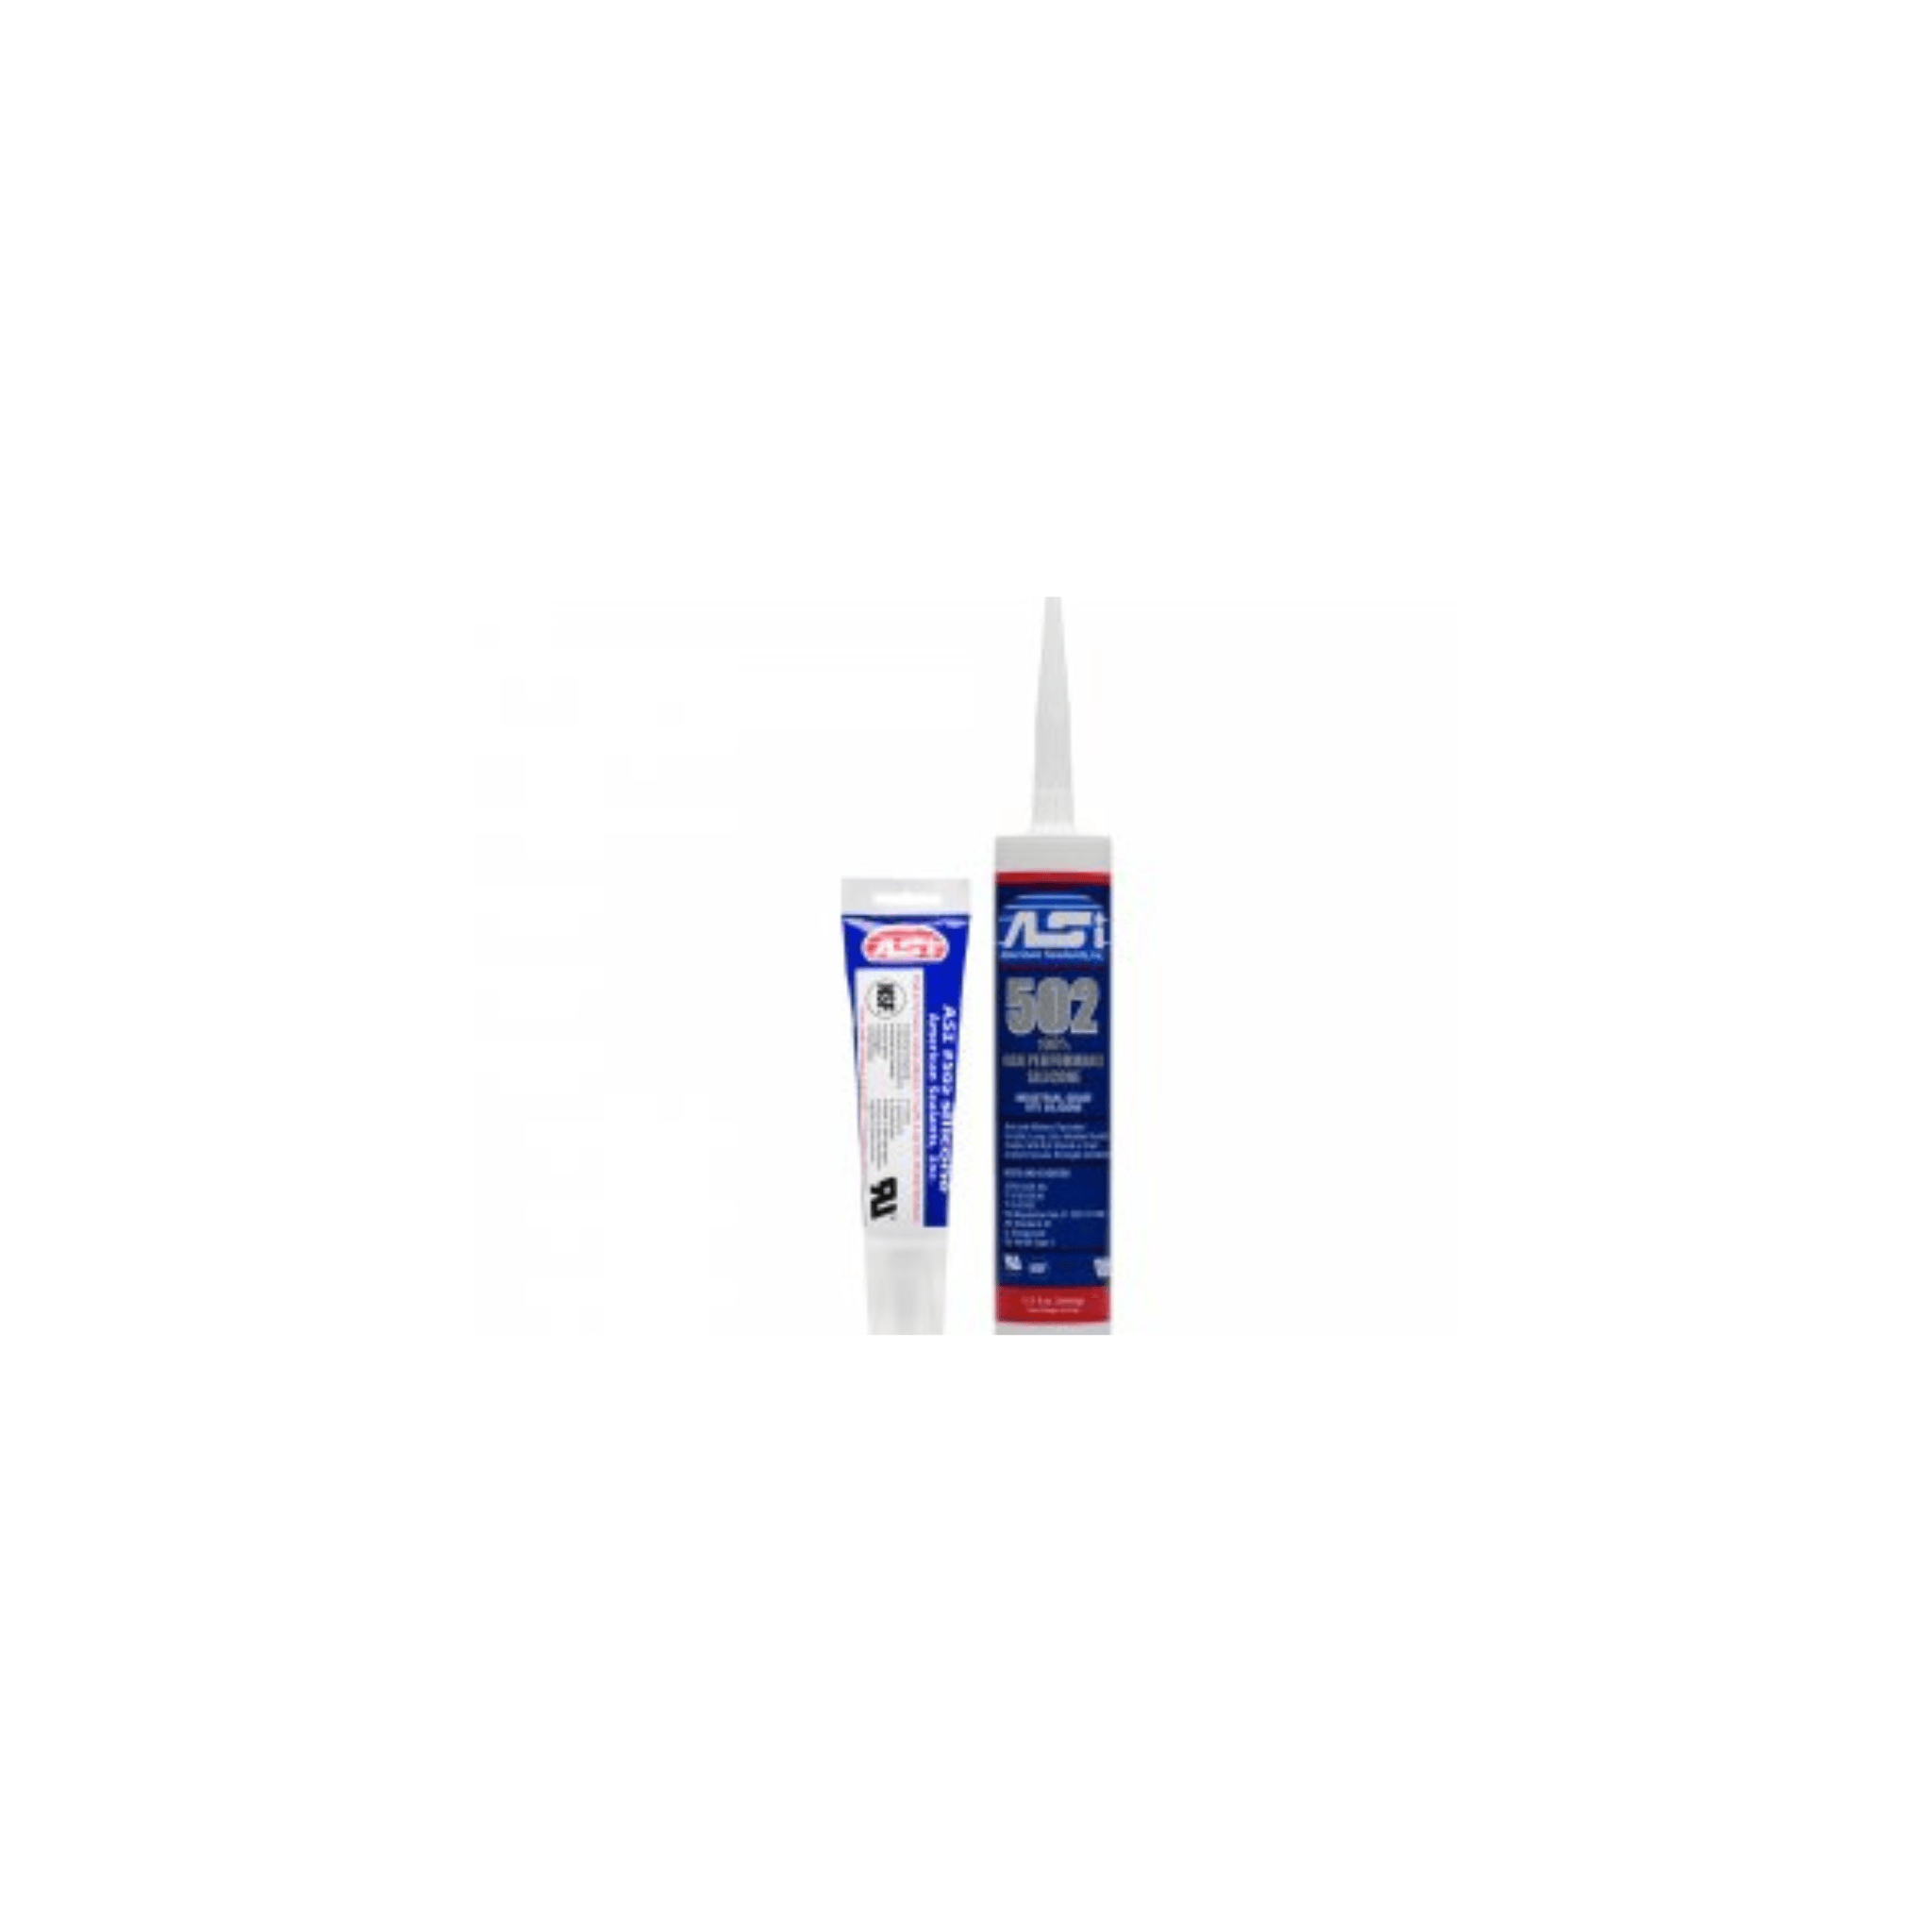 ASI 100% RTV Silicone "Clear" - Direct Stone Tool Supply, Inc